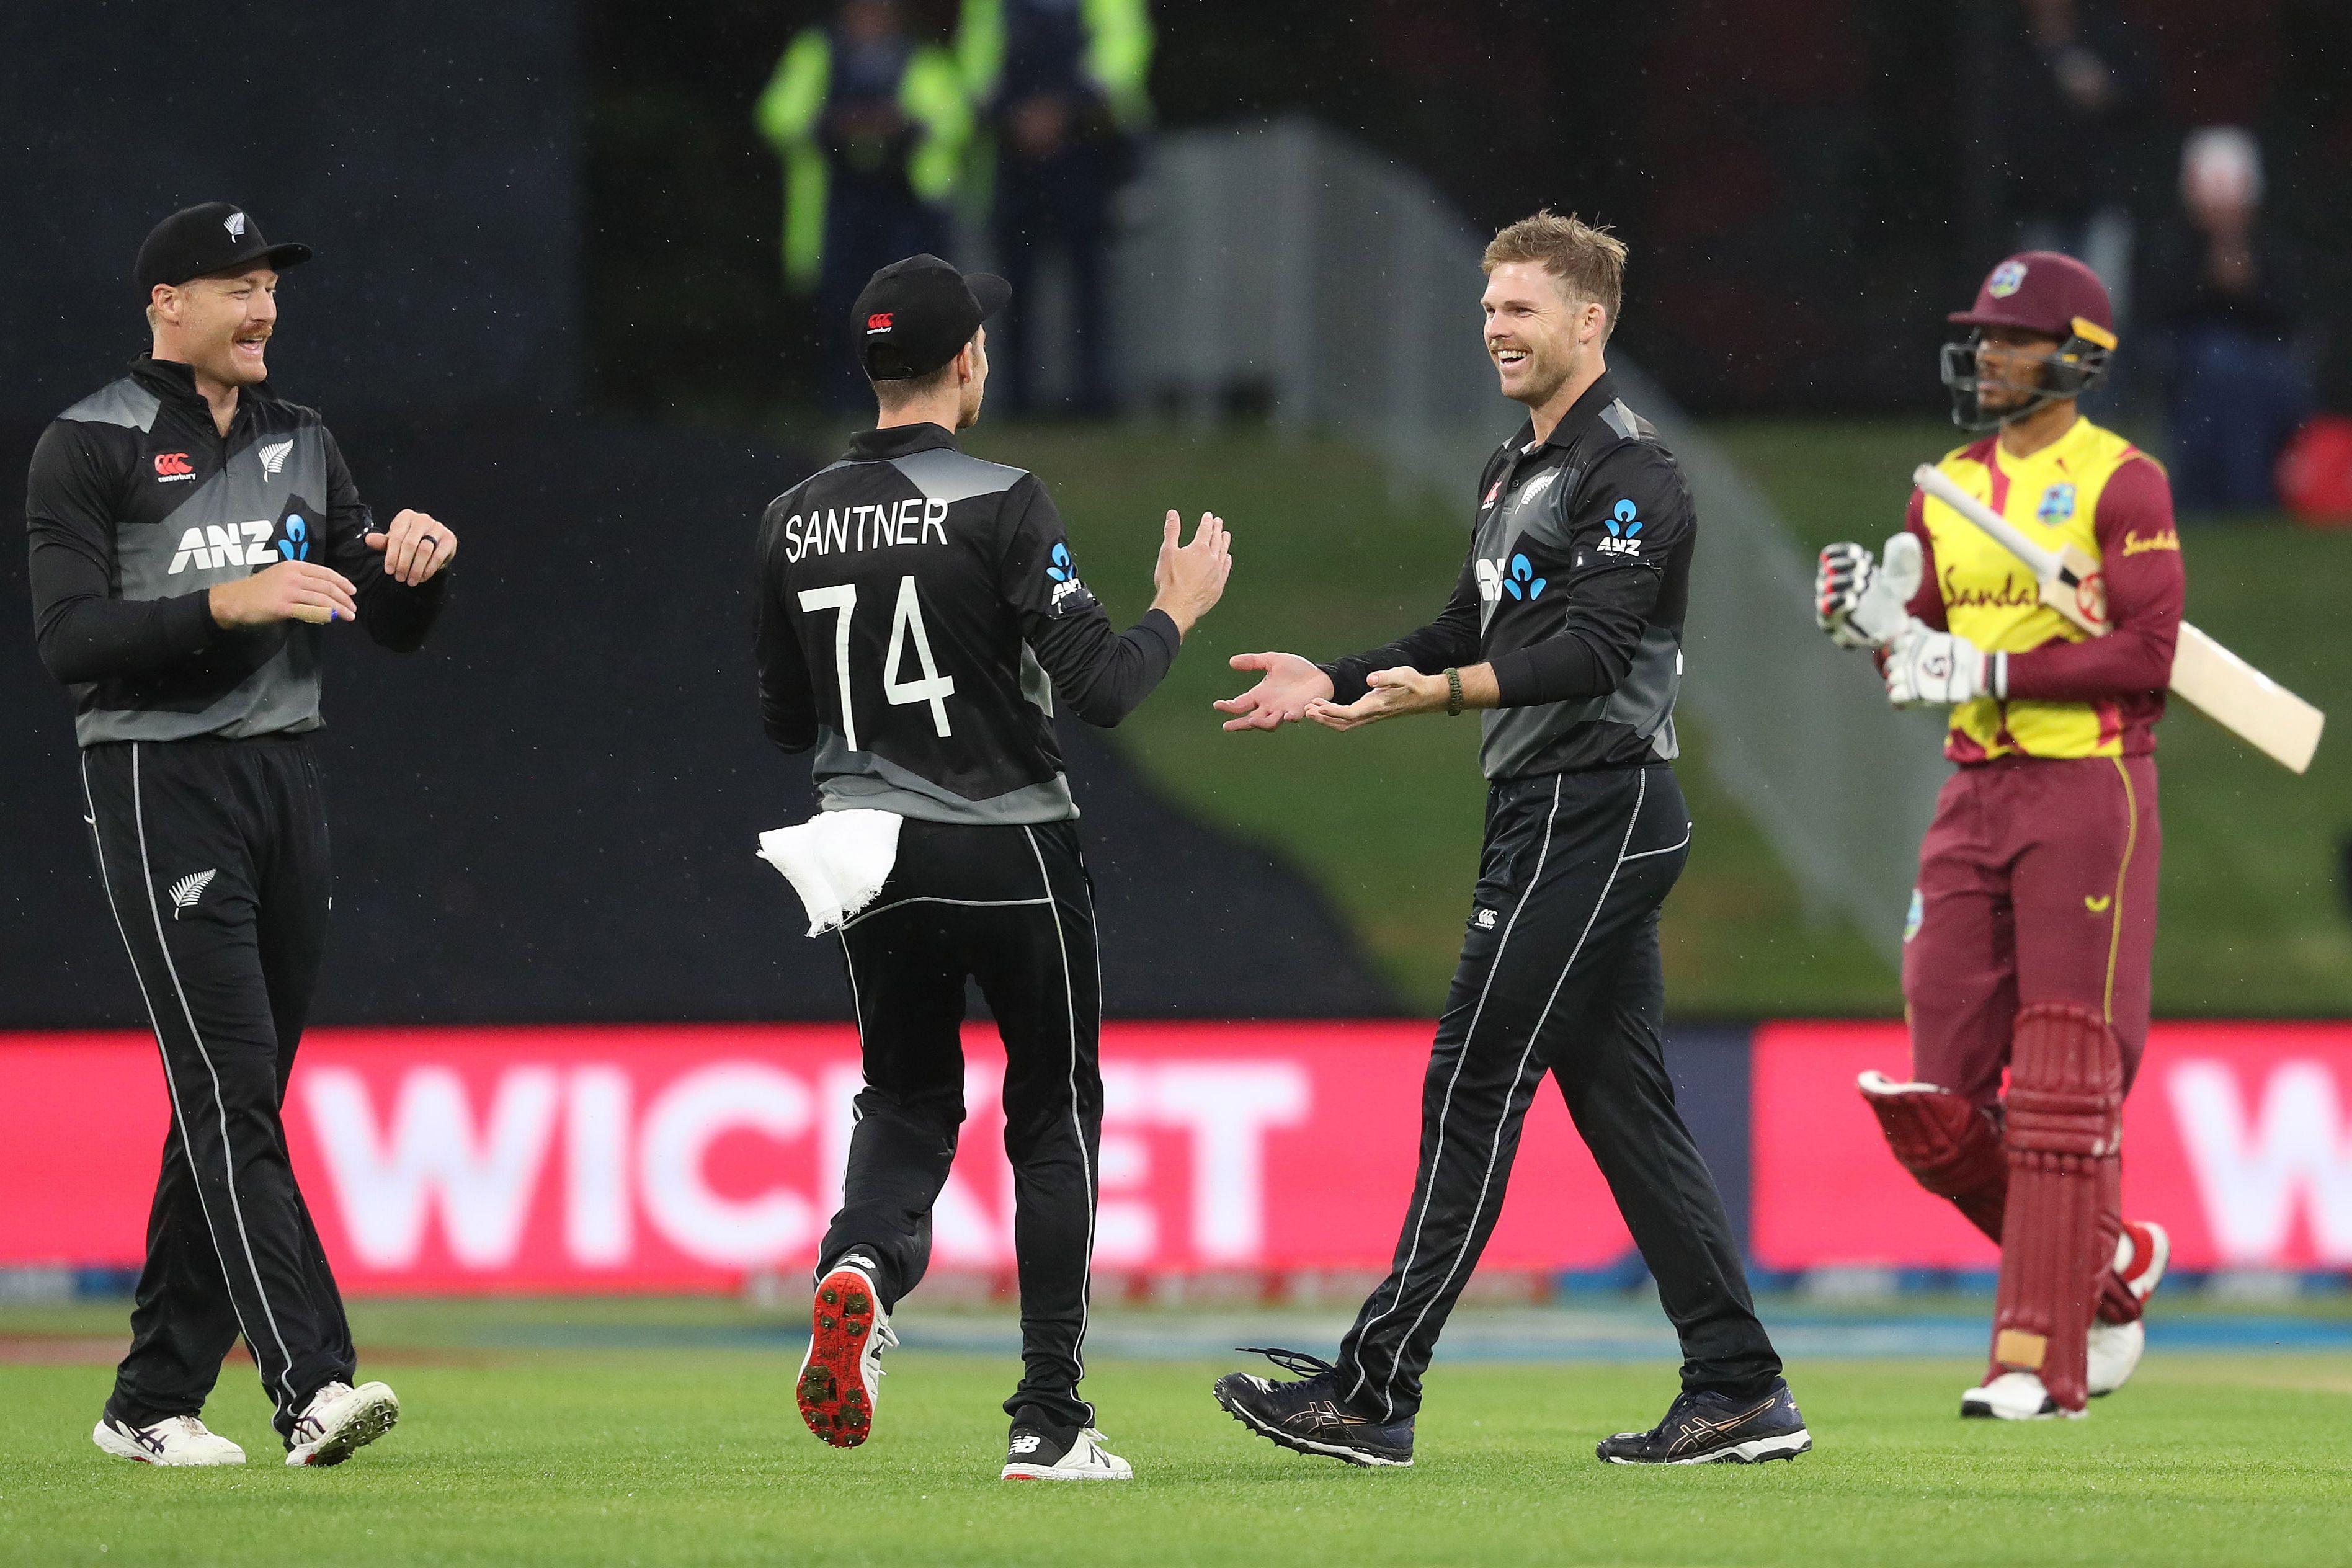 New Zealand’s Lockie Ferguson (2nd R) celebrates with Mitchell Santner (C) and Martin Guptill (L) for the wicket of West Indies' Brandon King (R) during the third Twenty20 International cricket. Credit: AFP Photo